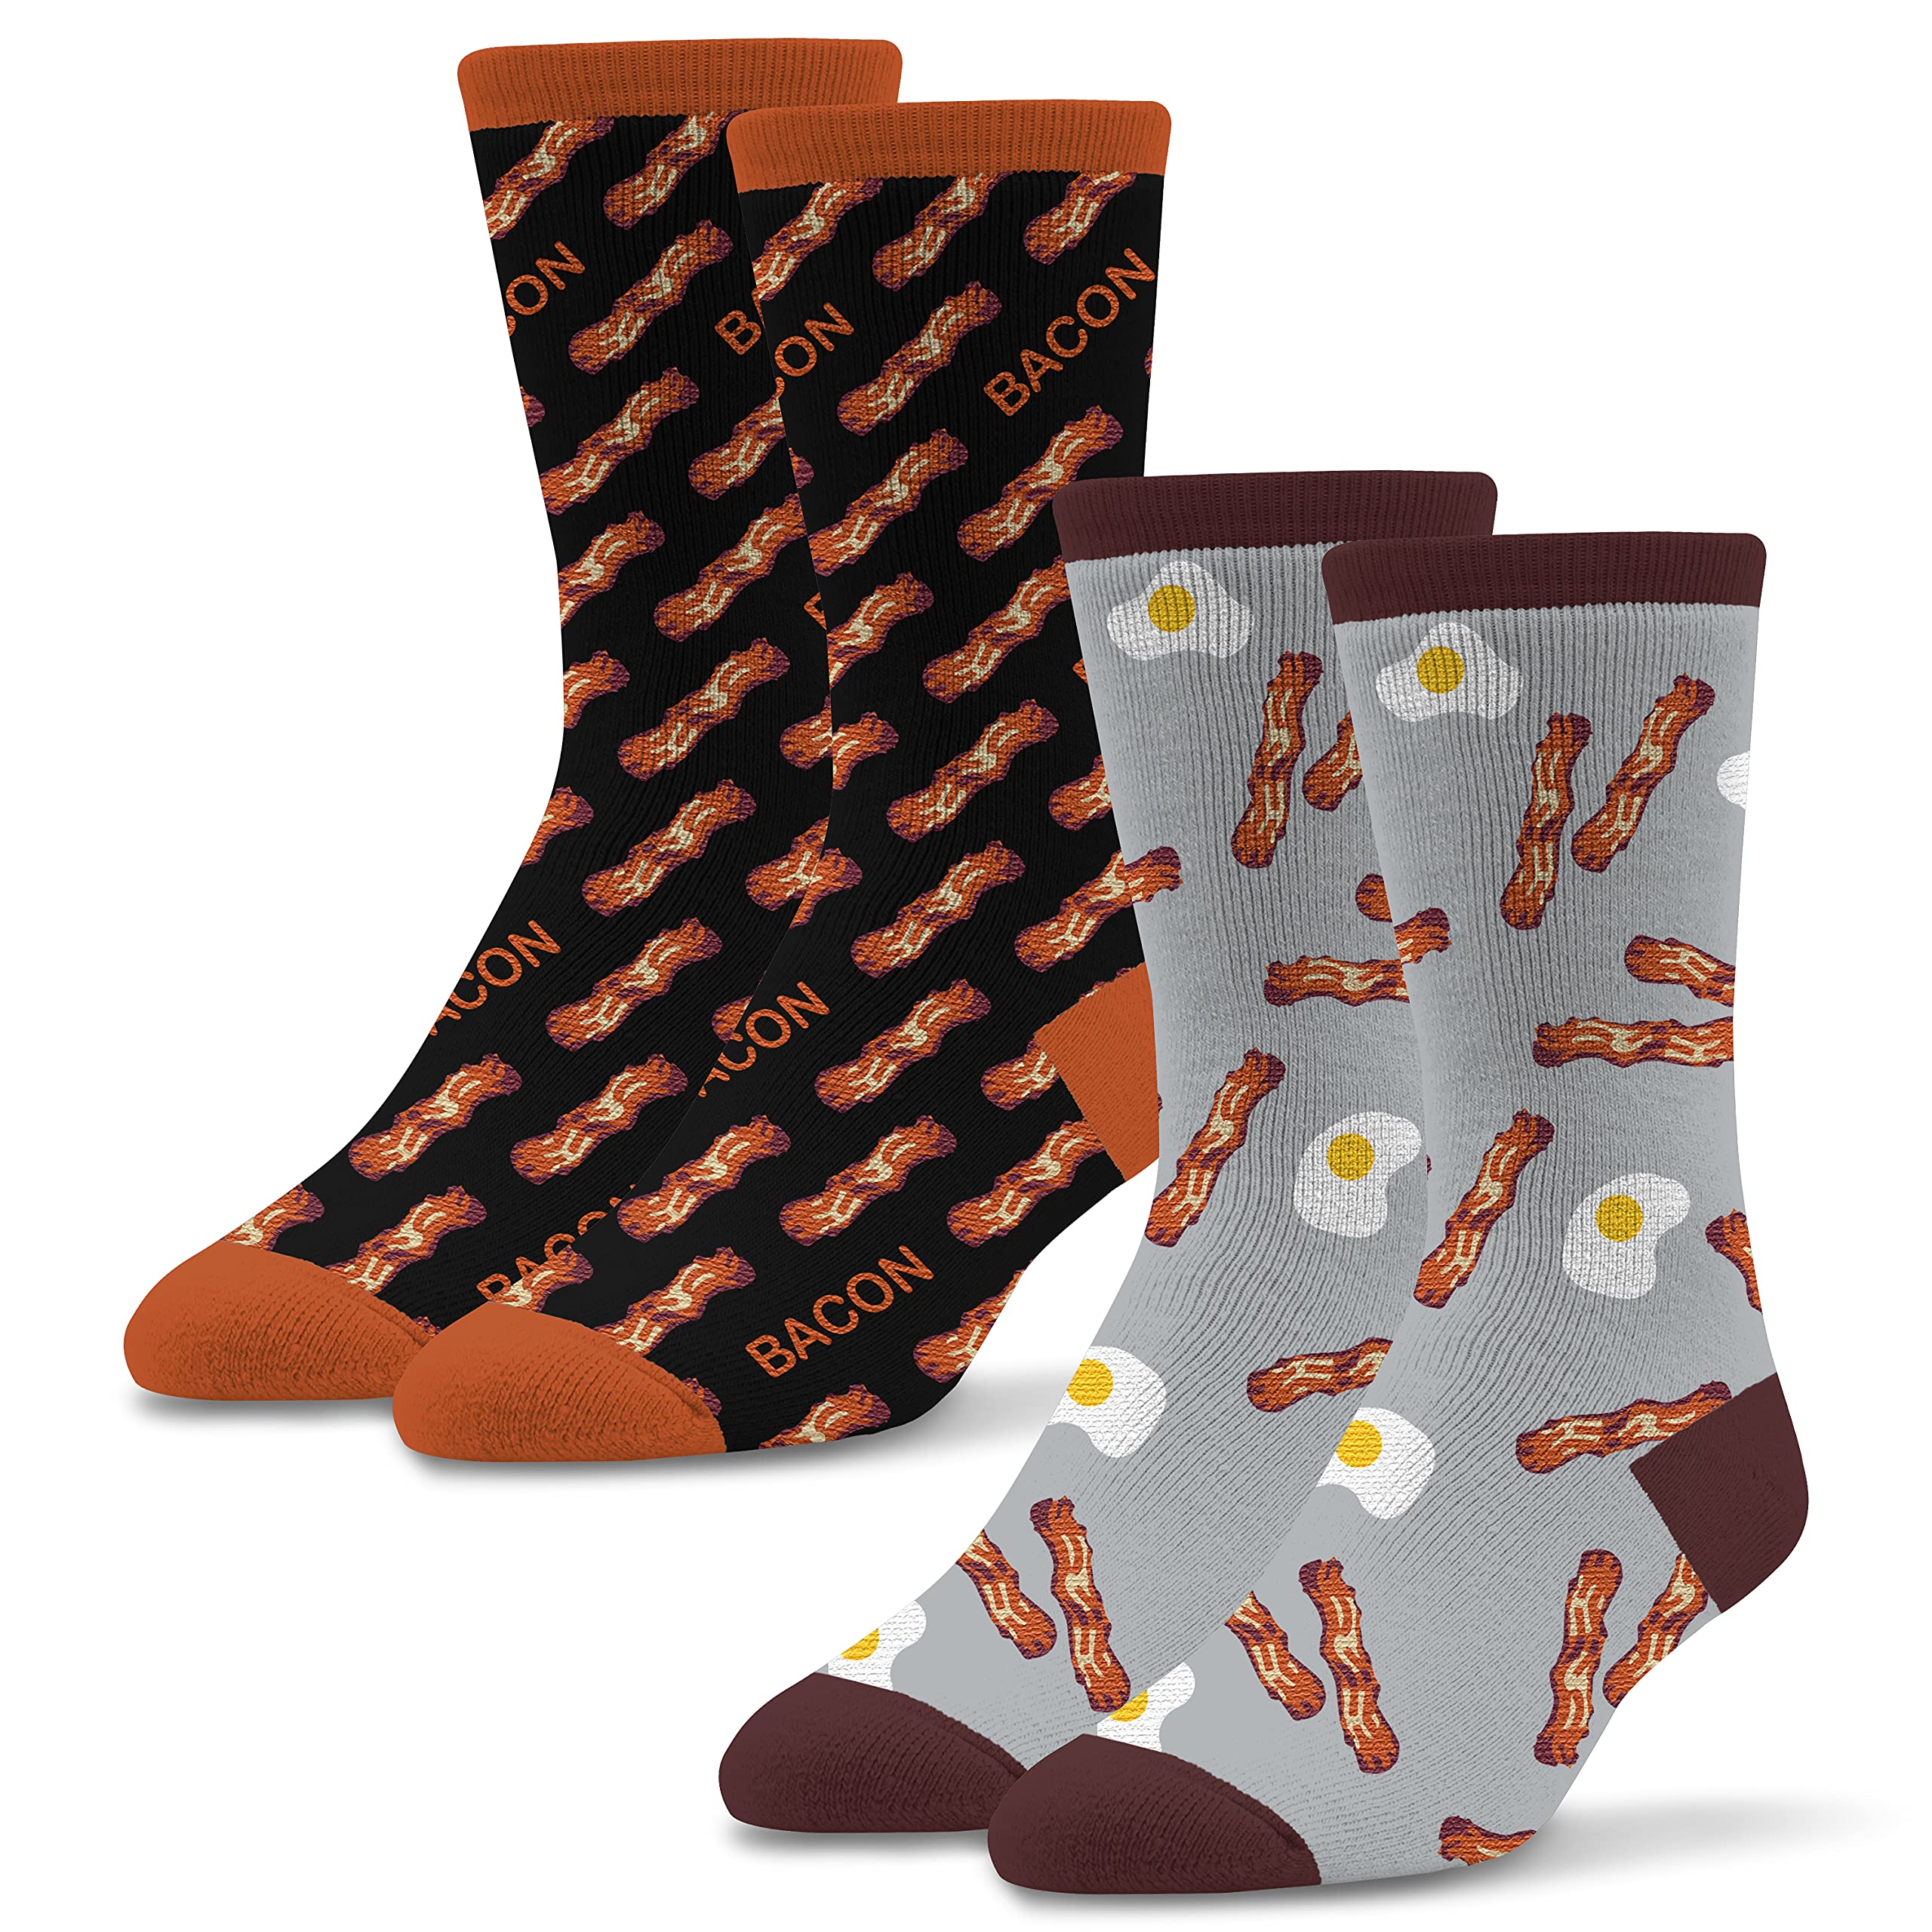 Socktastic mens Bacon - 2 Pack of Funny Novelty Socks, Casual Crew Fits Shoe Size 8-13 Socks, If You Can Read This Bring More Bacon, Large US